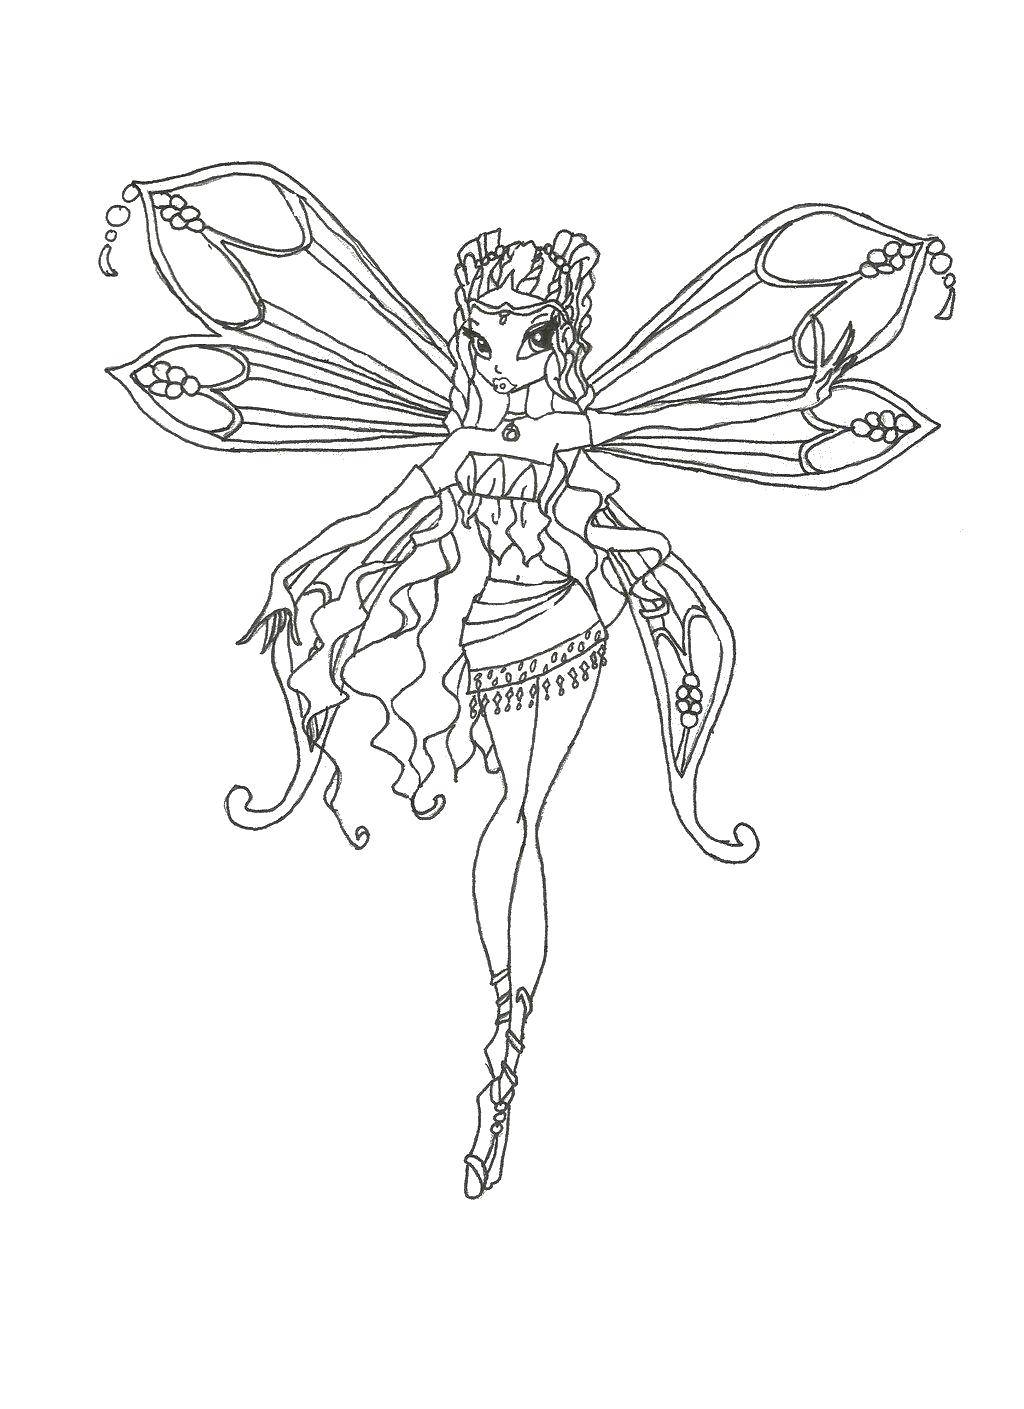 Coloring Elegant fairy. Category Winx club. Tags:  Character cartoon, Winx.